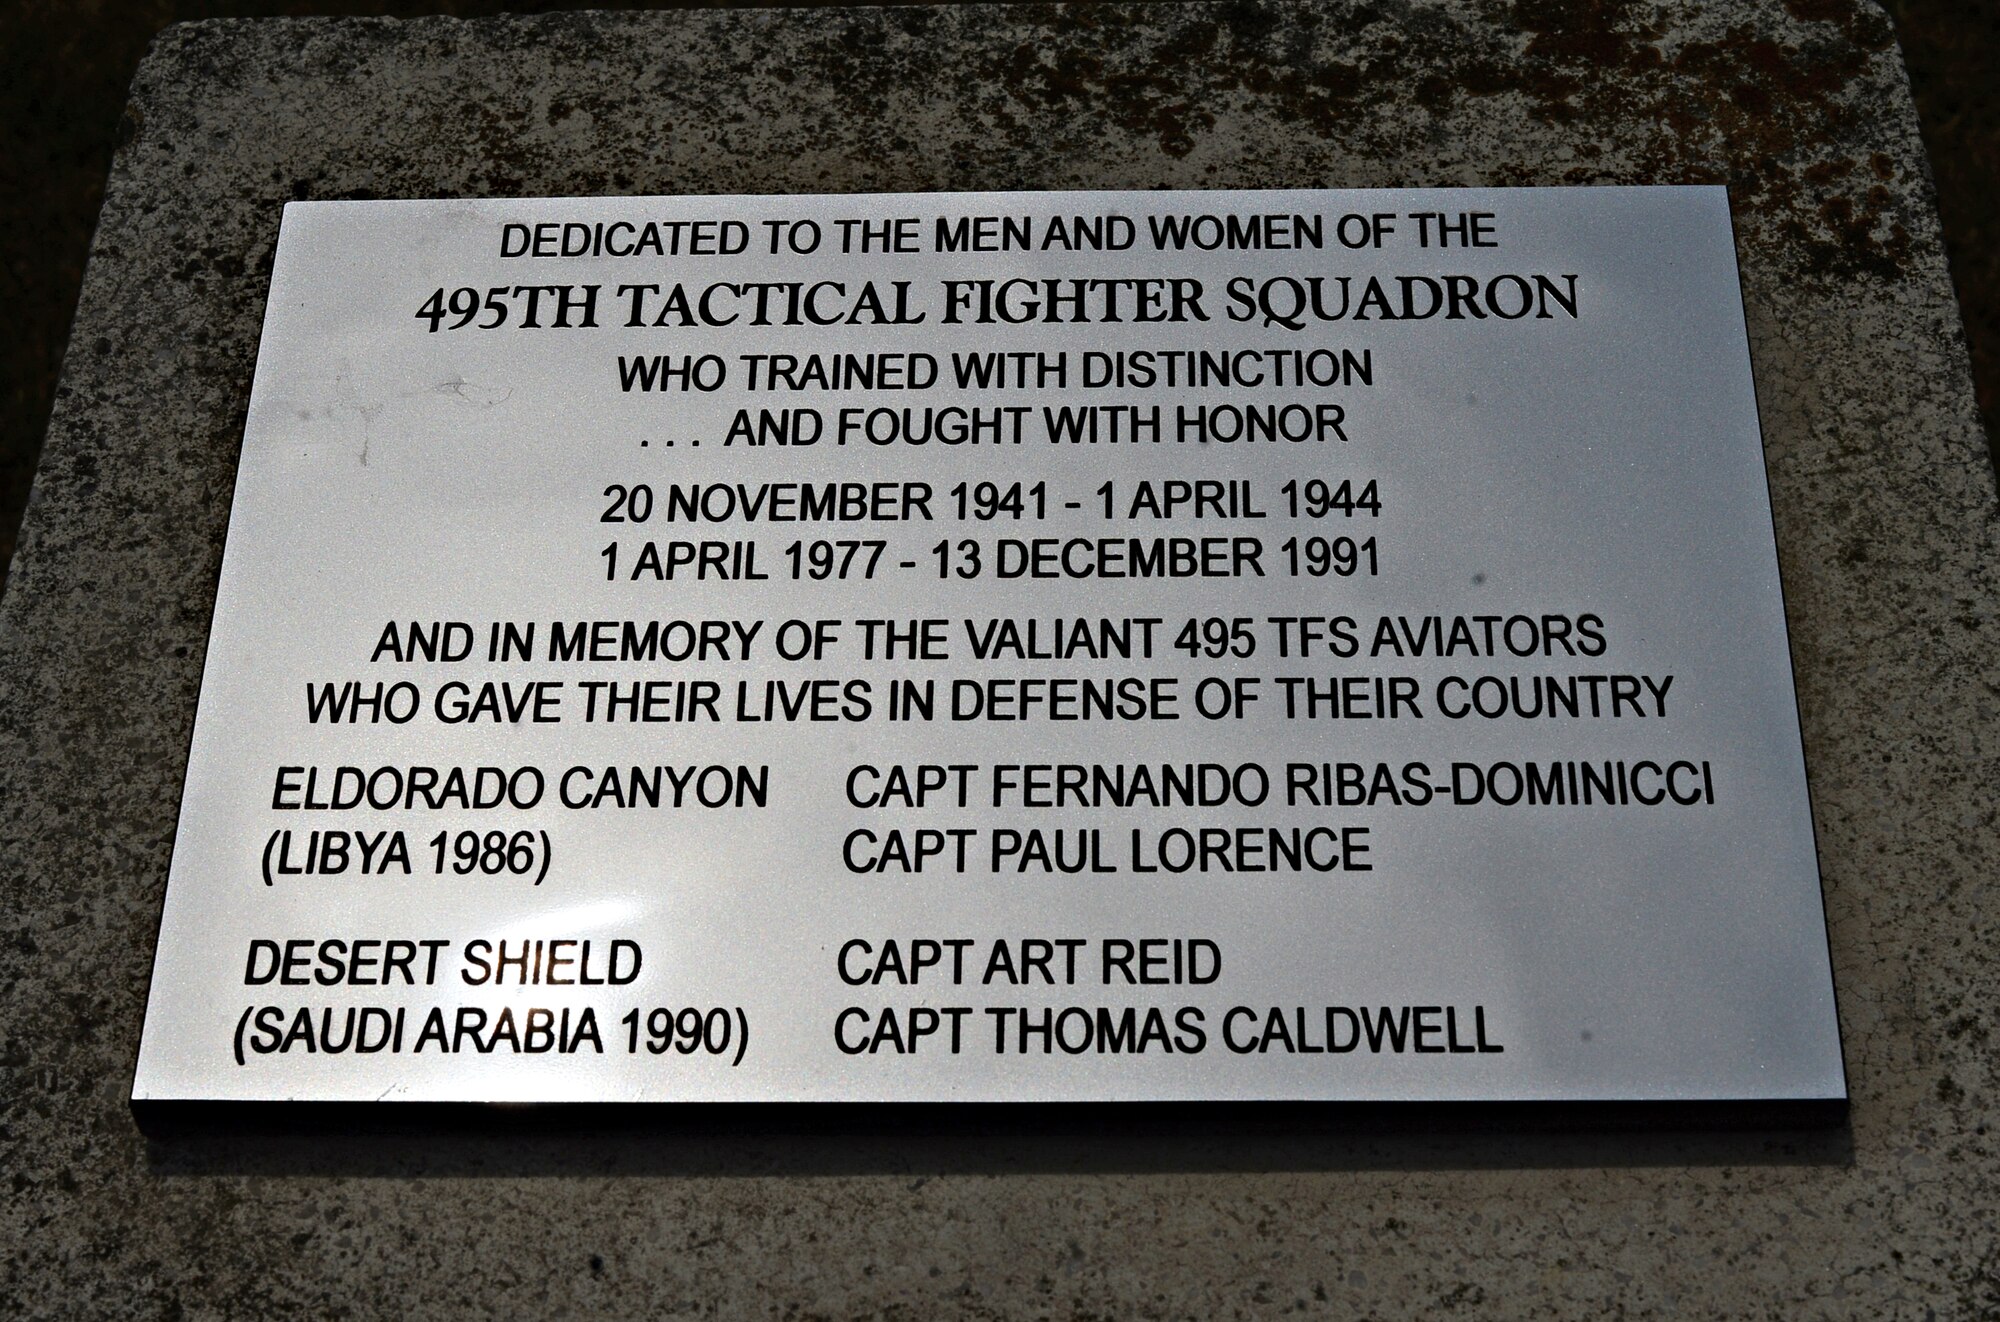 A new plaque dedicated to Royal Air Force Lakenheath’s deactivated 495th Tactical Fighter Squadron, was placed on a time capsule memorial at RAF Lakenheath, England, June 19, 2015. Activated in 1977, the squadron functioned as a replacement training unit for the Liberty Wing’s 492nd, 493rd and 494th Fighter Squadrons that are active today. (U.S. Air Force photo by Senior Airman Erin O’Shea/Released)